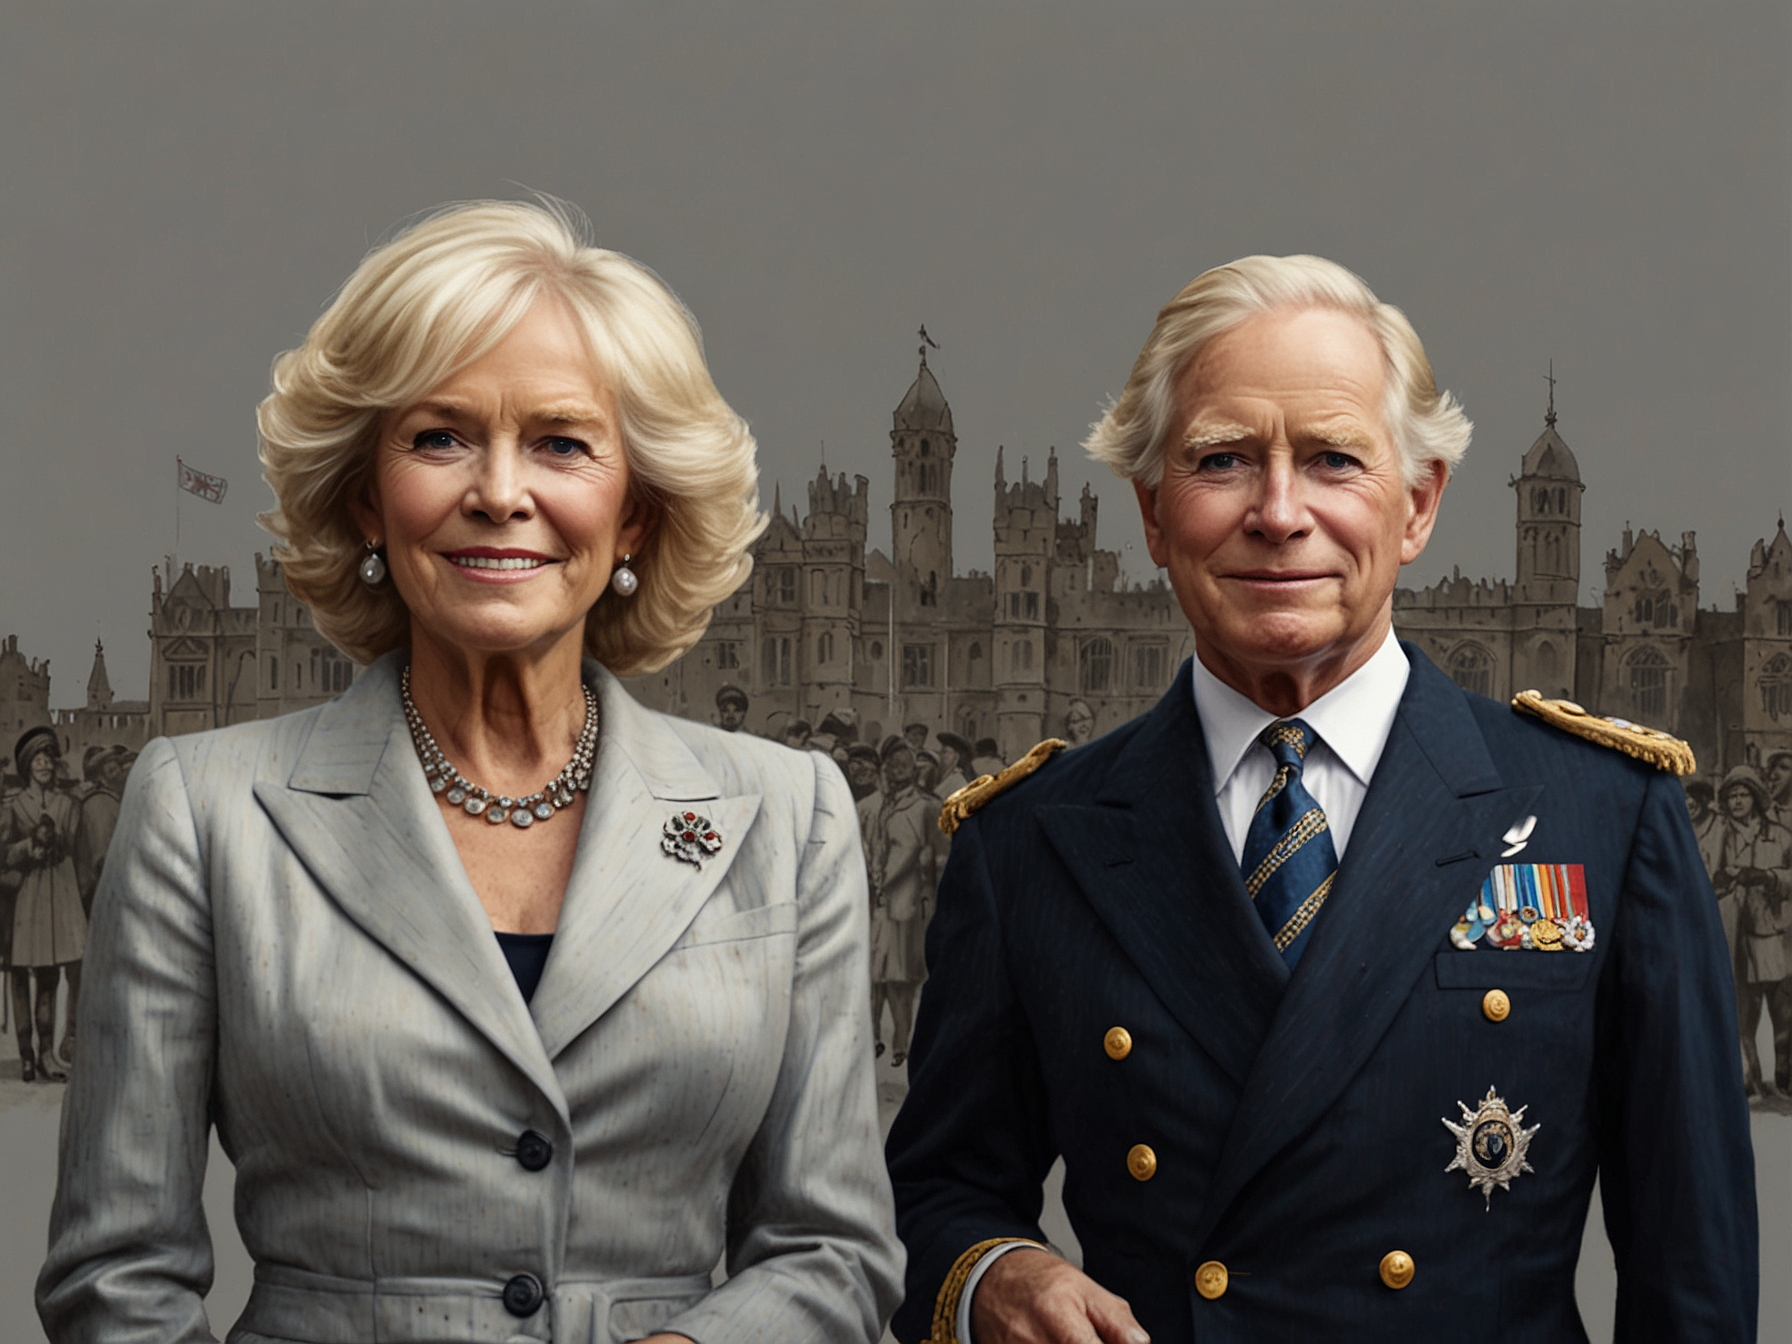 King Charles III and Queen Camilla together at a public event, illustrating their strong bond and King Charles's protective nature amidst his health struggles.